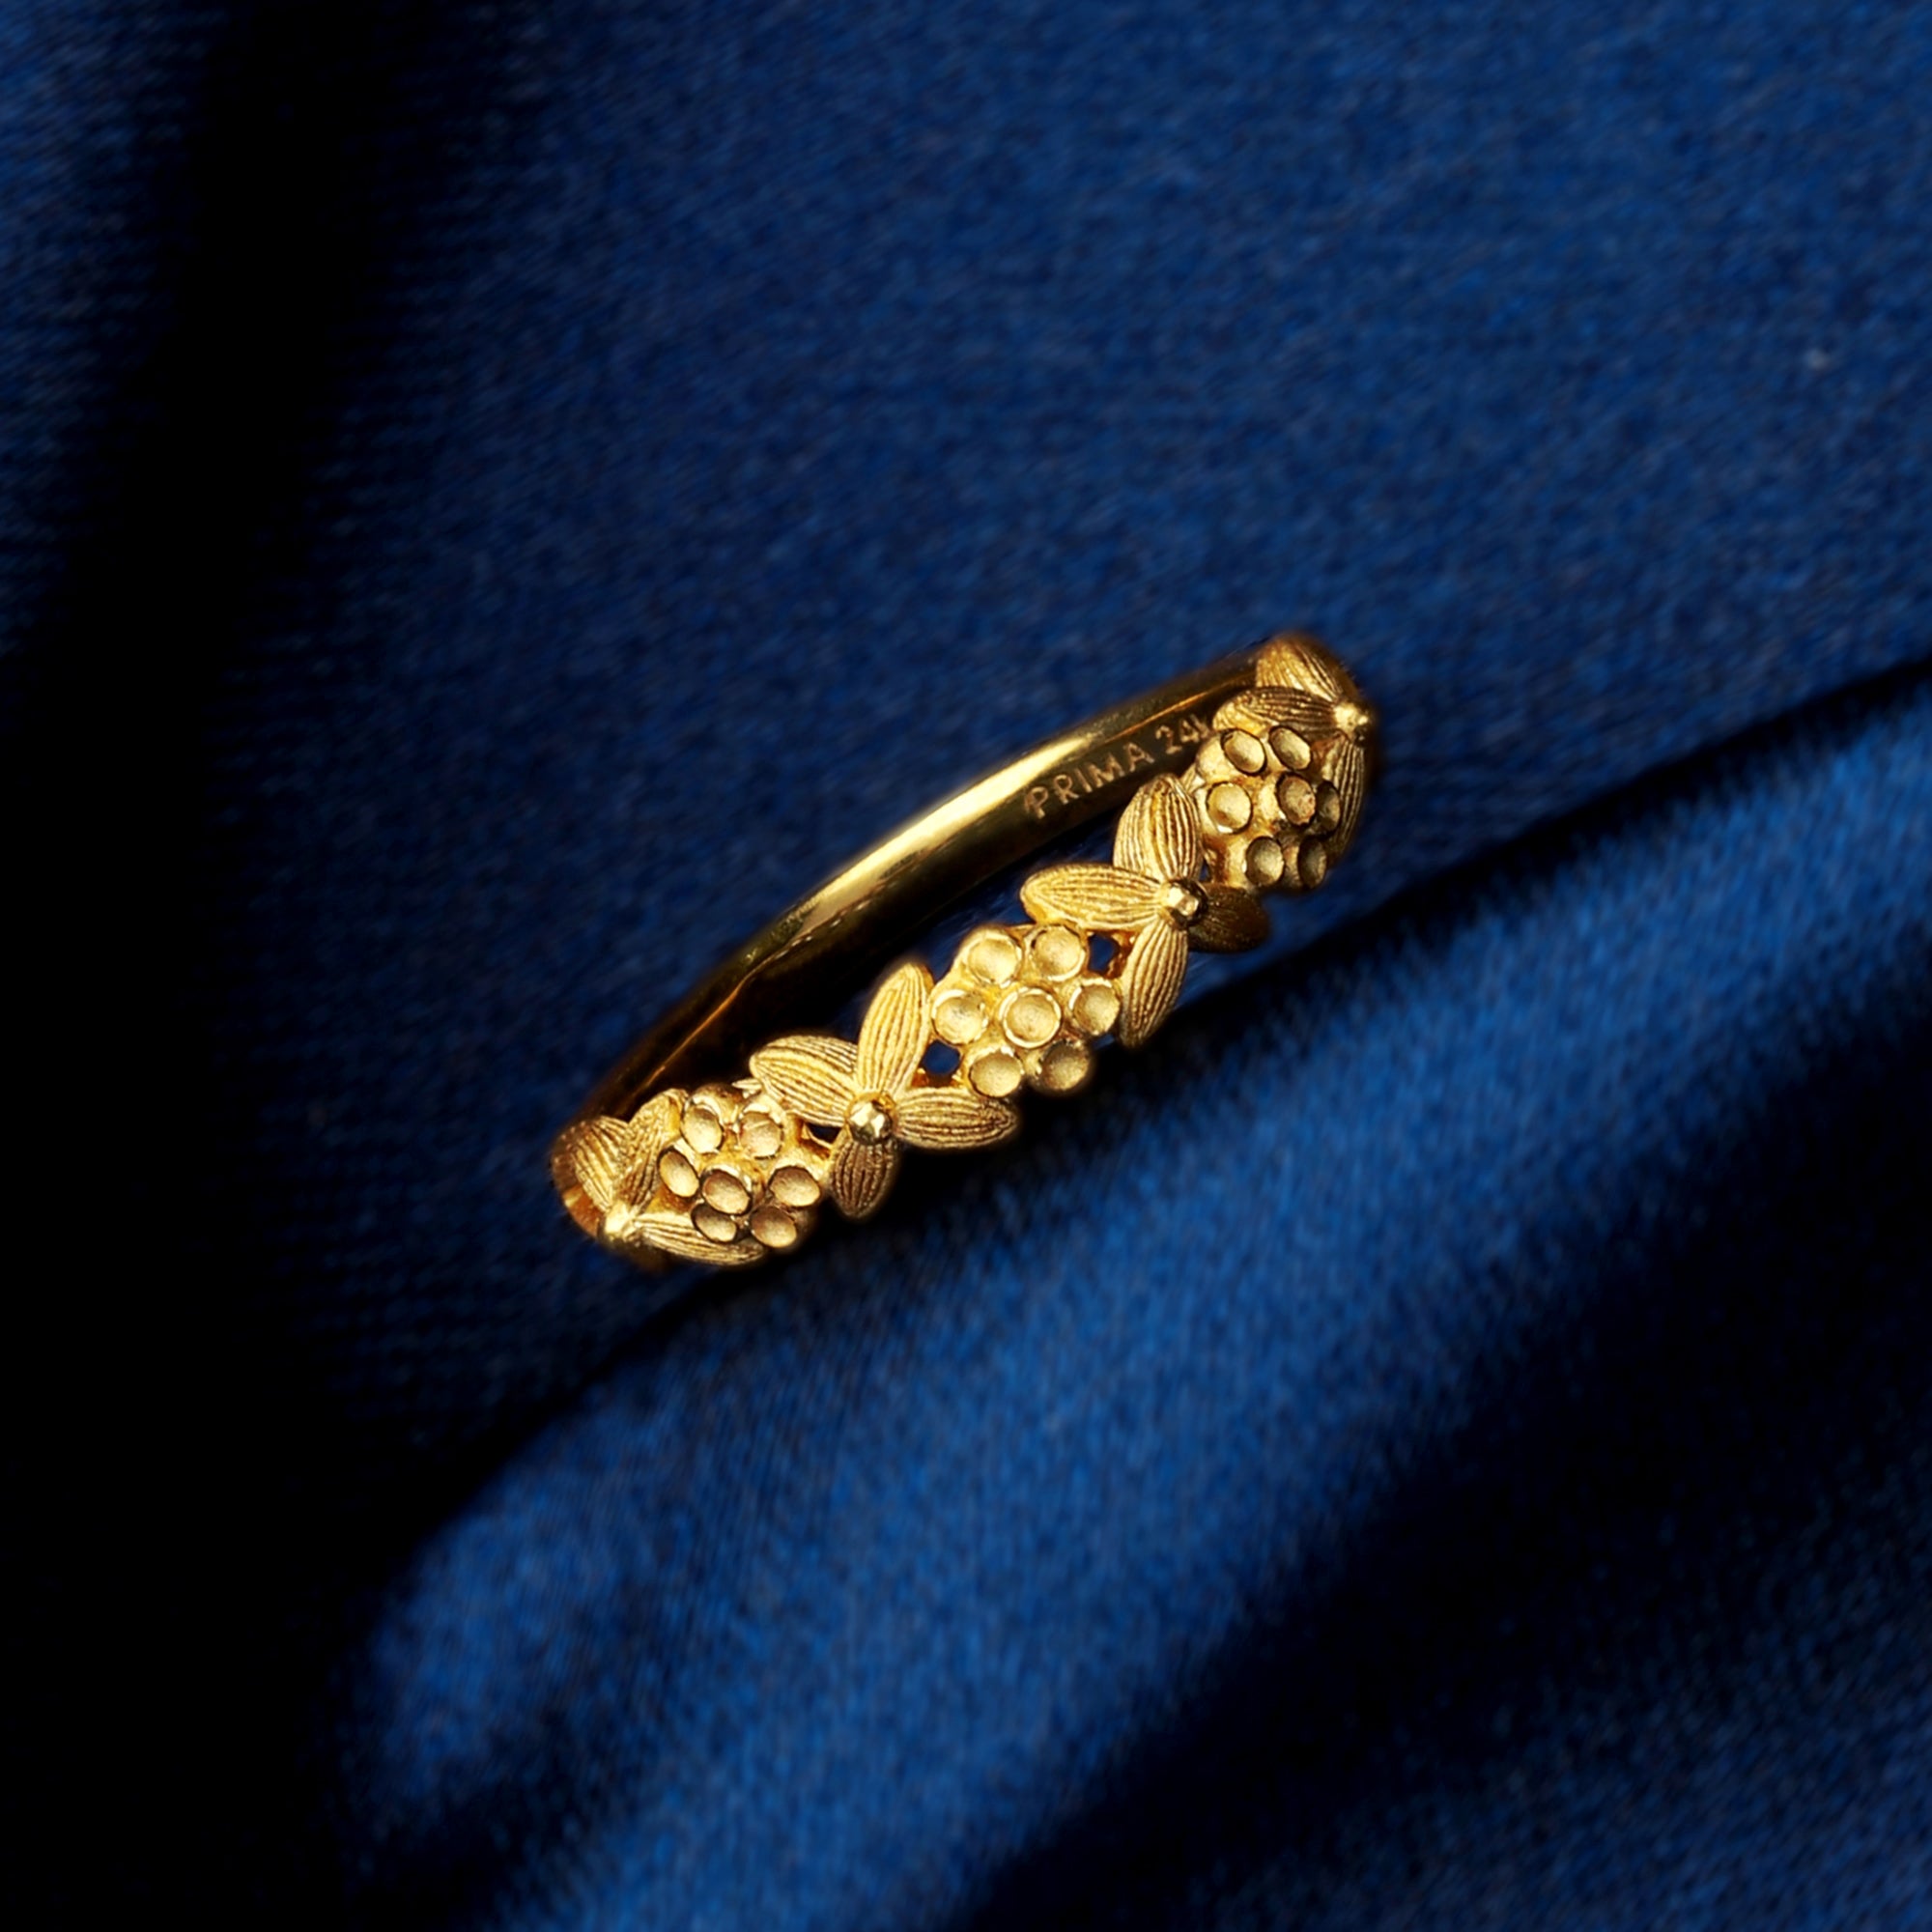 Flower Design Women Fashion Gold Ring (22Kt) in Kolkata at best price by  New S.P. Jewells - Justdial